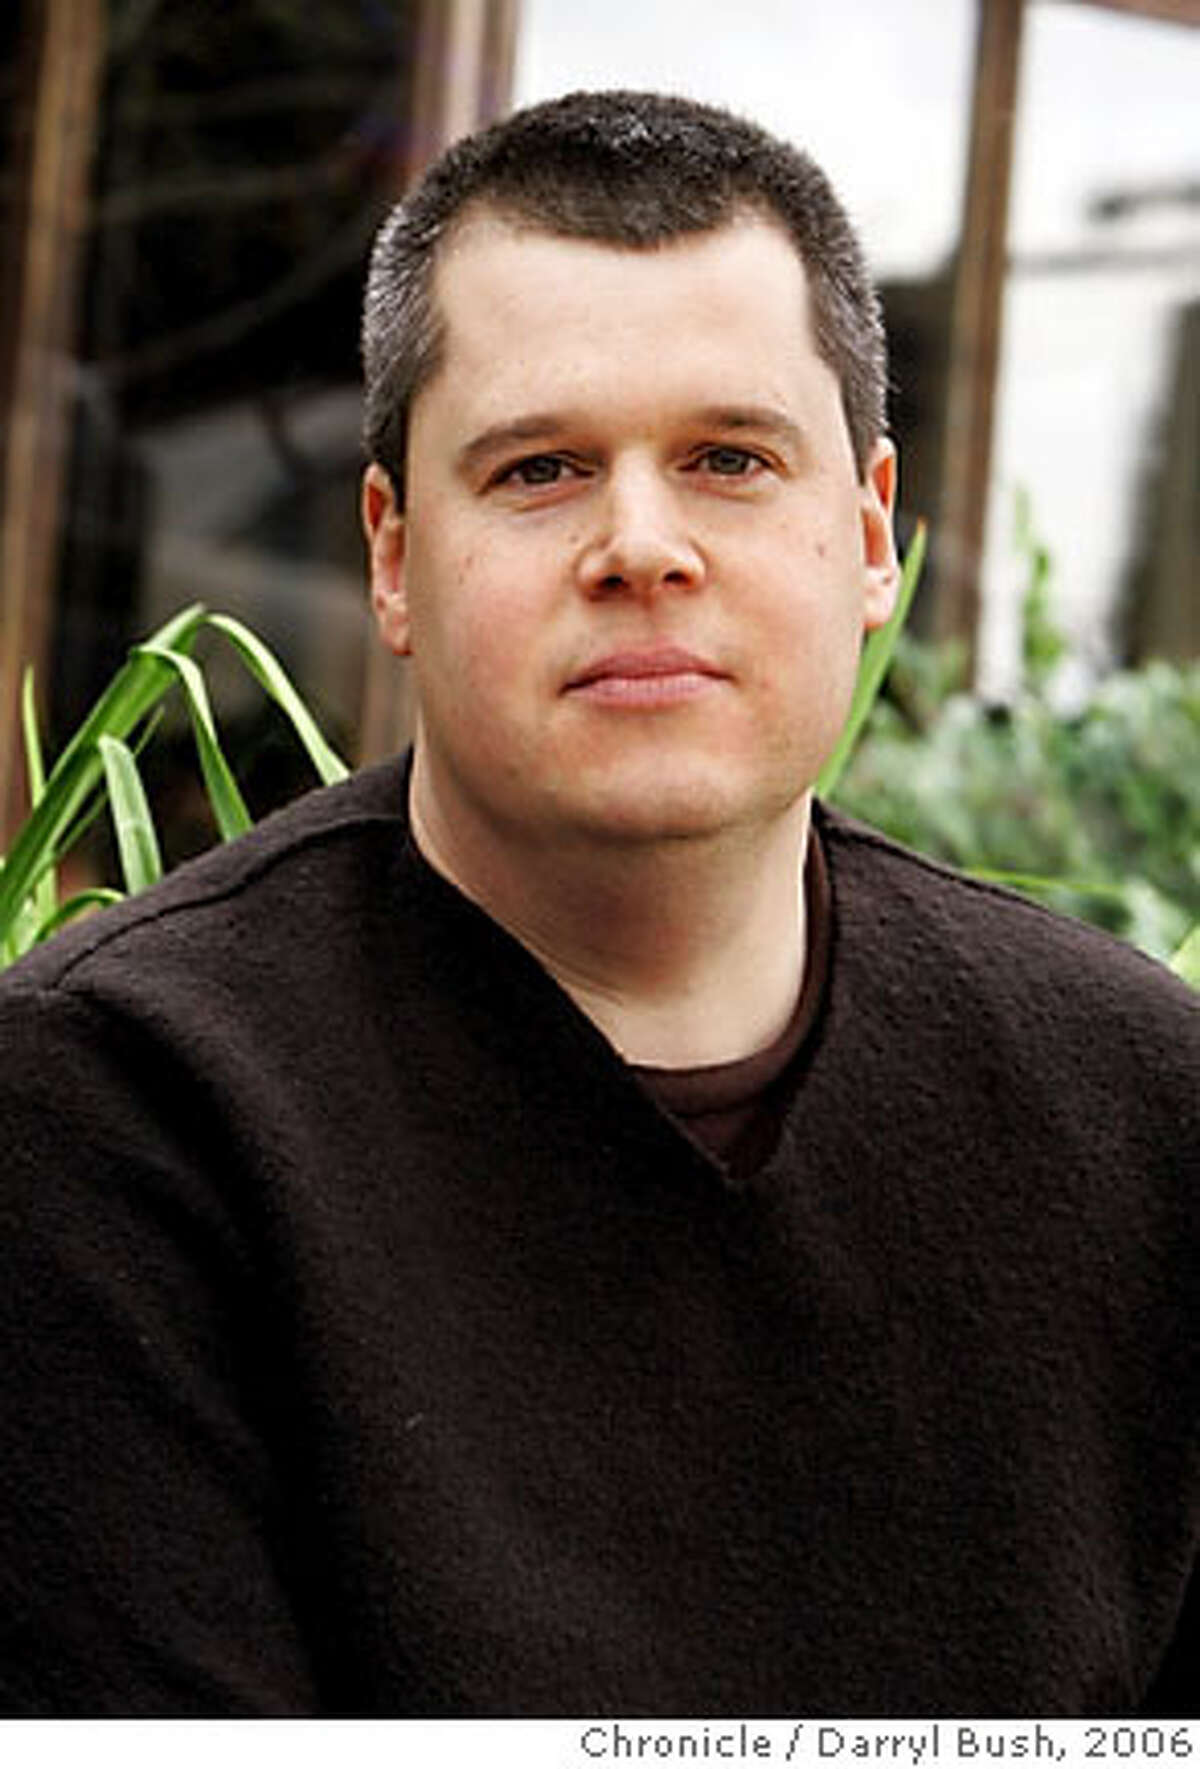 Author Daniel Handler (Lemony Snicket) at Cafe Flore. Event on 1/27/06 in San Francisco. Darryl Bush / The Chronicle